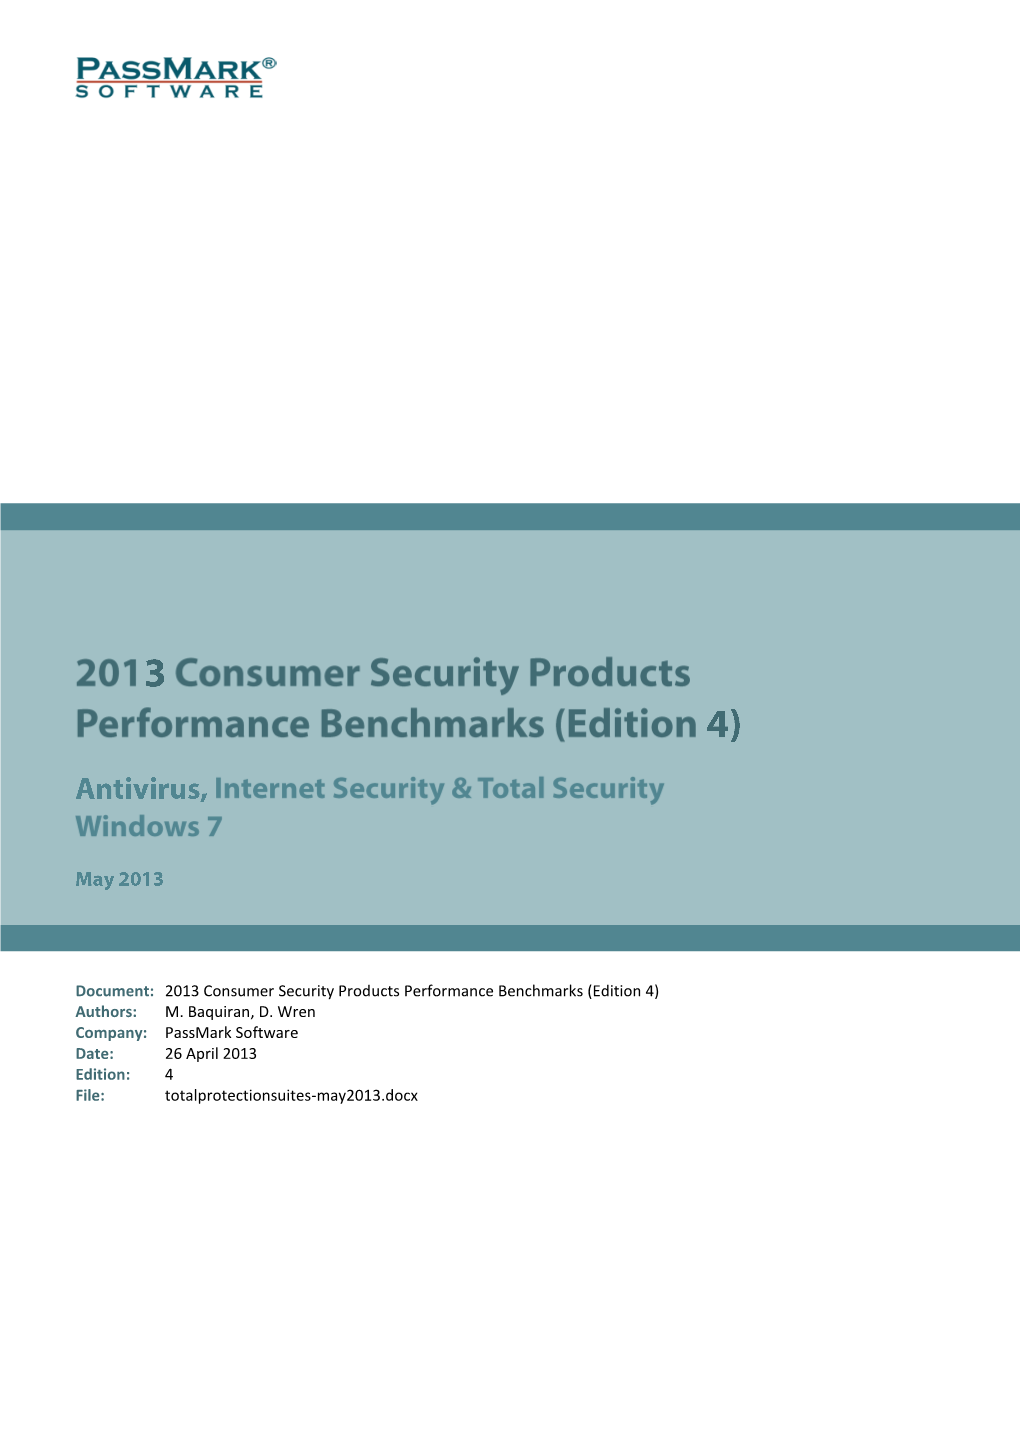 2013 Consumer Security Products Performance Benchmarks (Edition 4) Authors: M